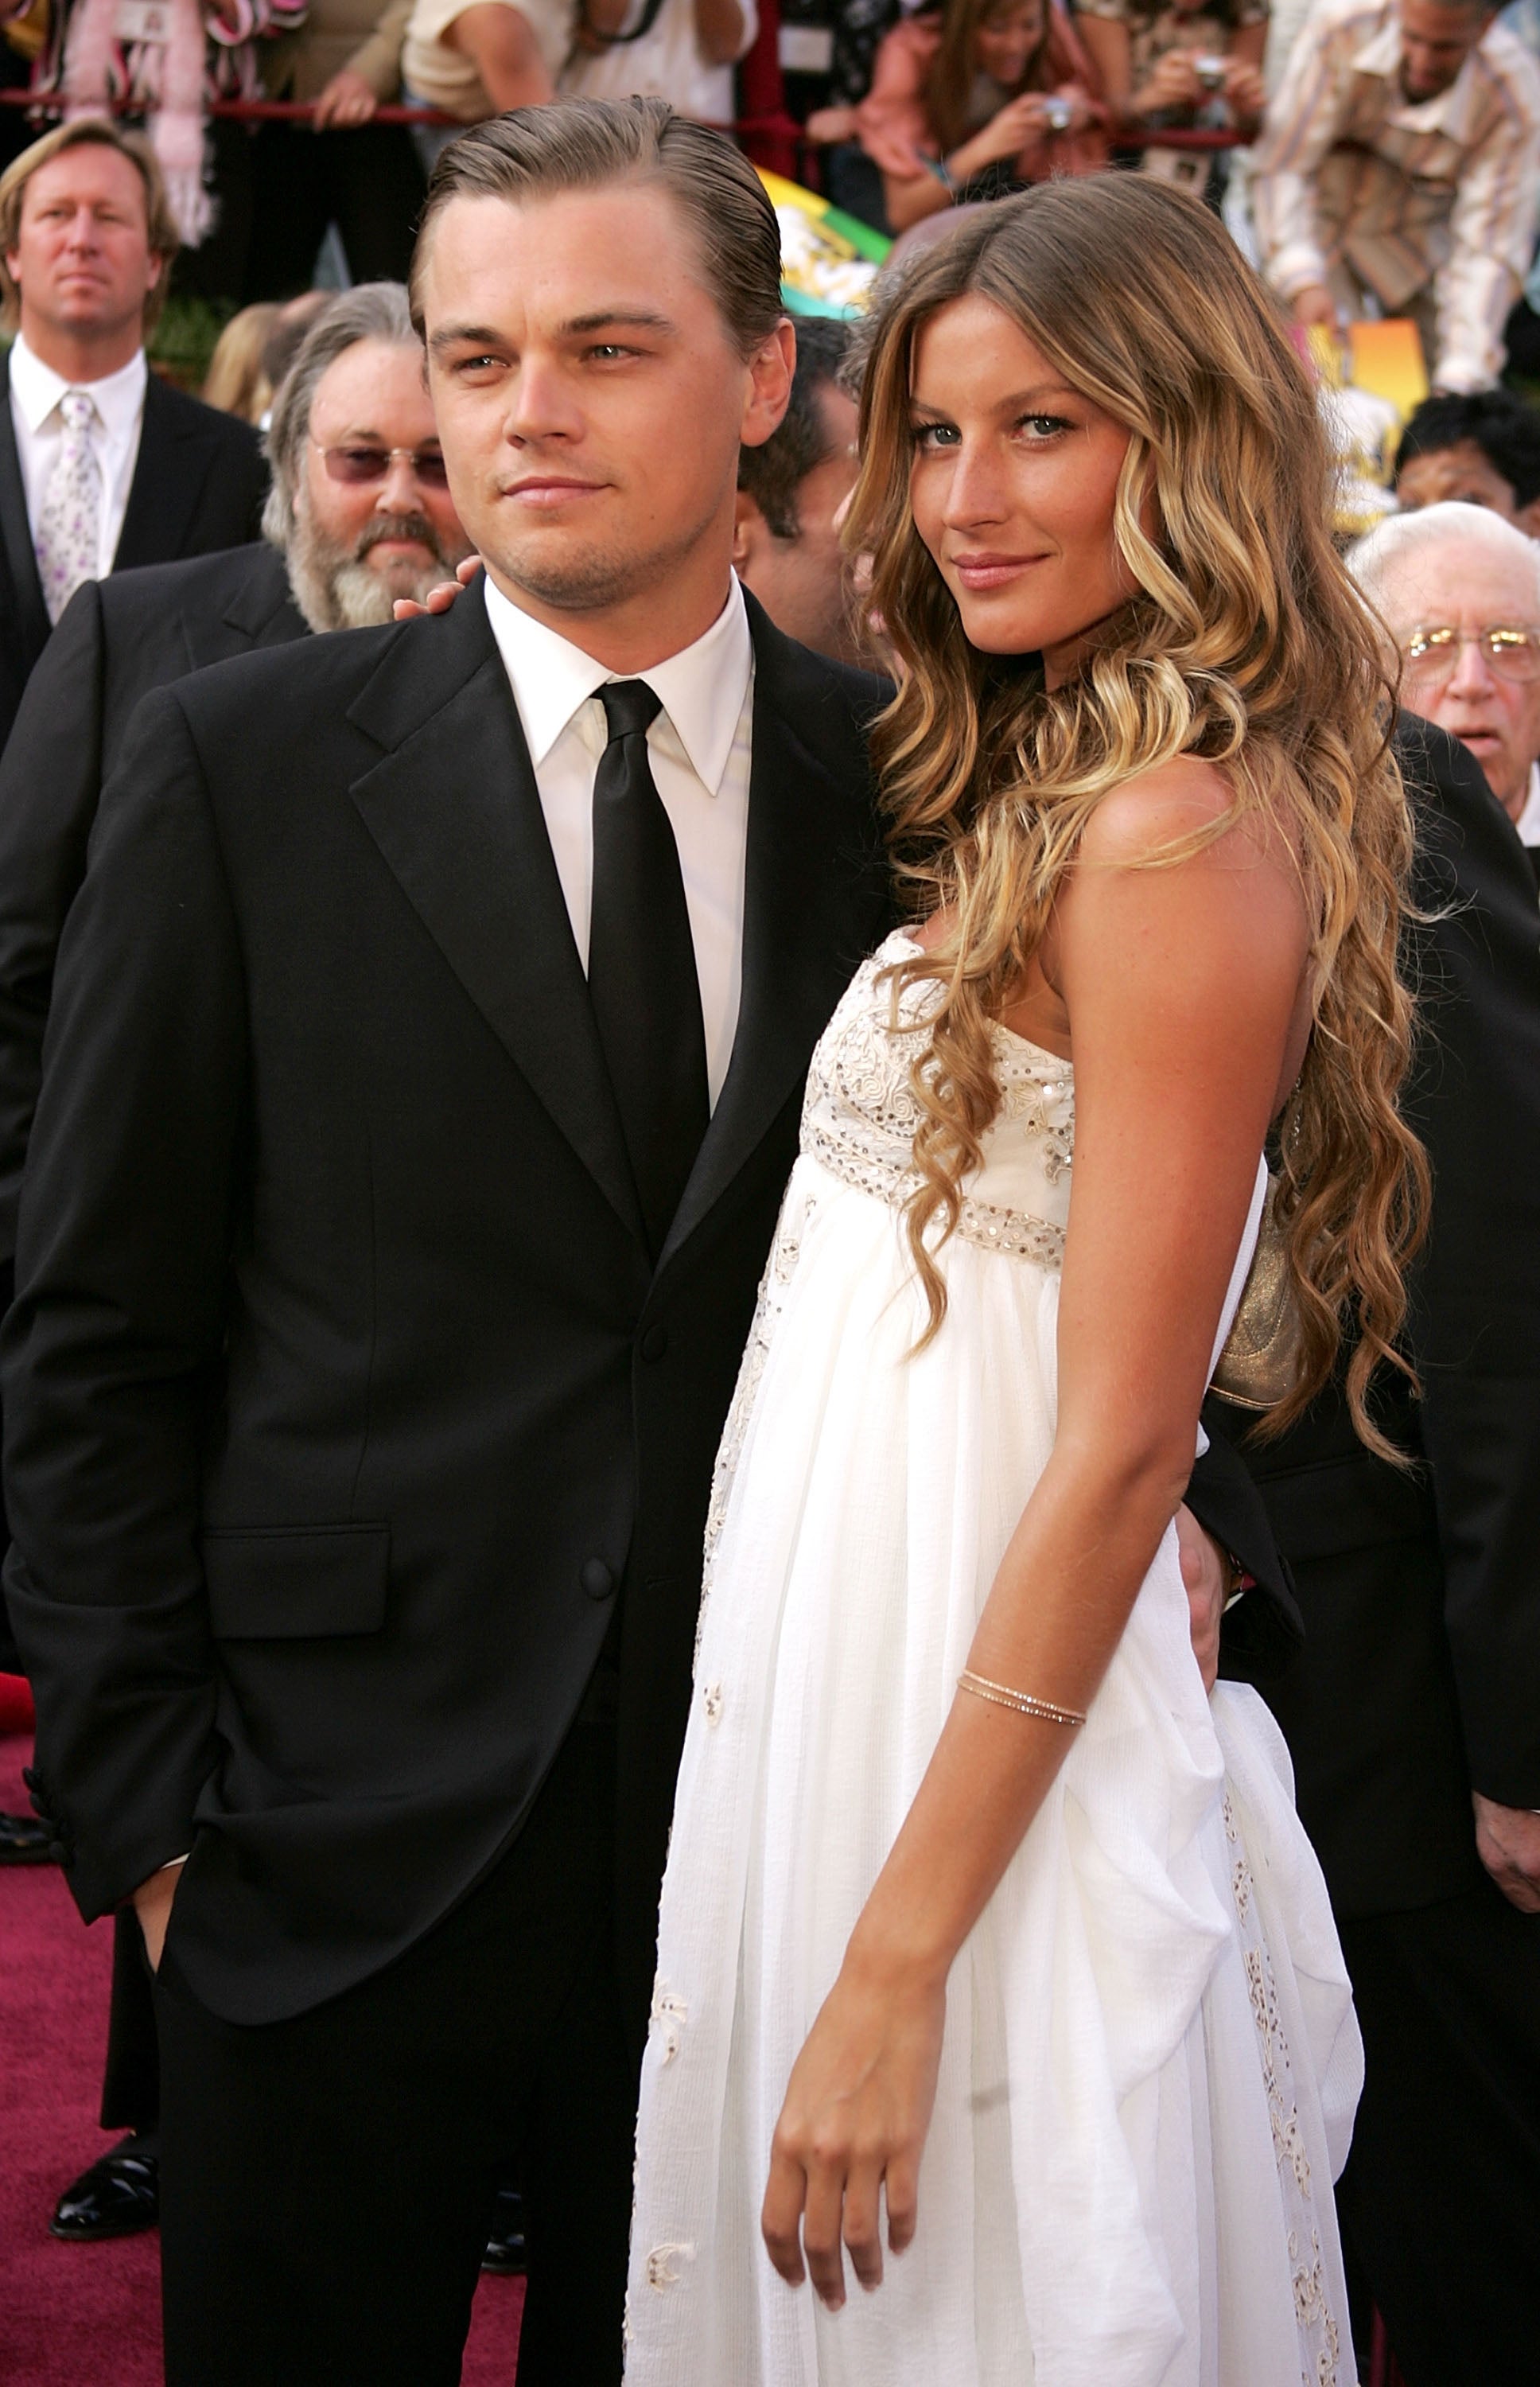 <p>Leonardo DiCaprio first started dating model Gisele Bündchen when she was 18 and he was 24 </p>